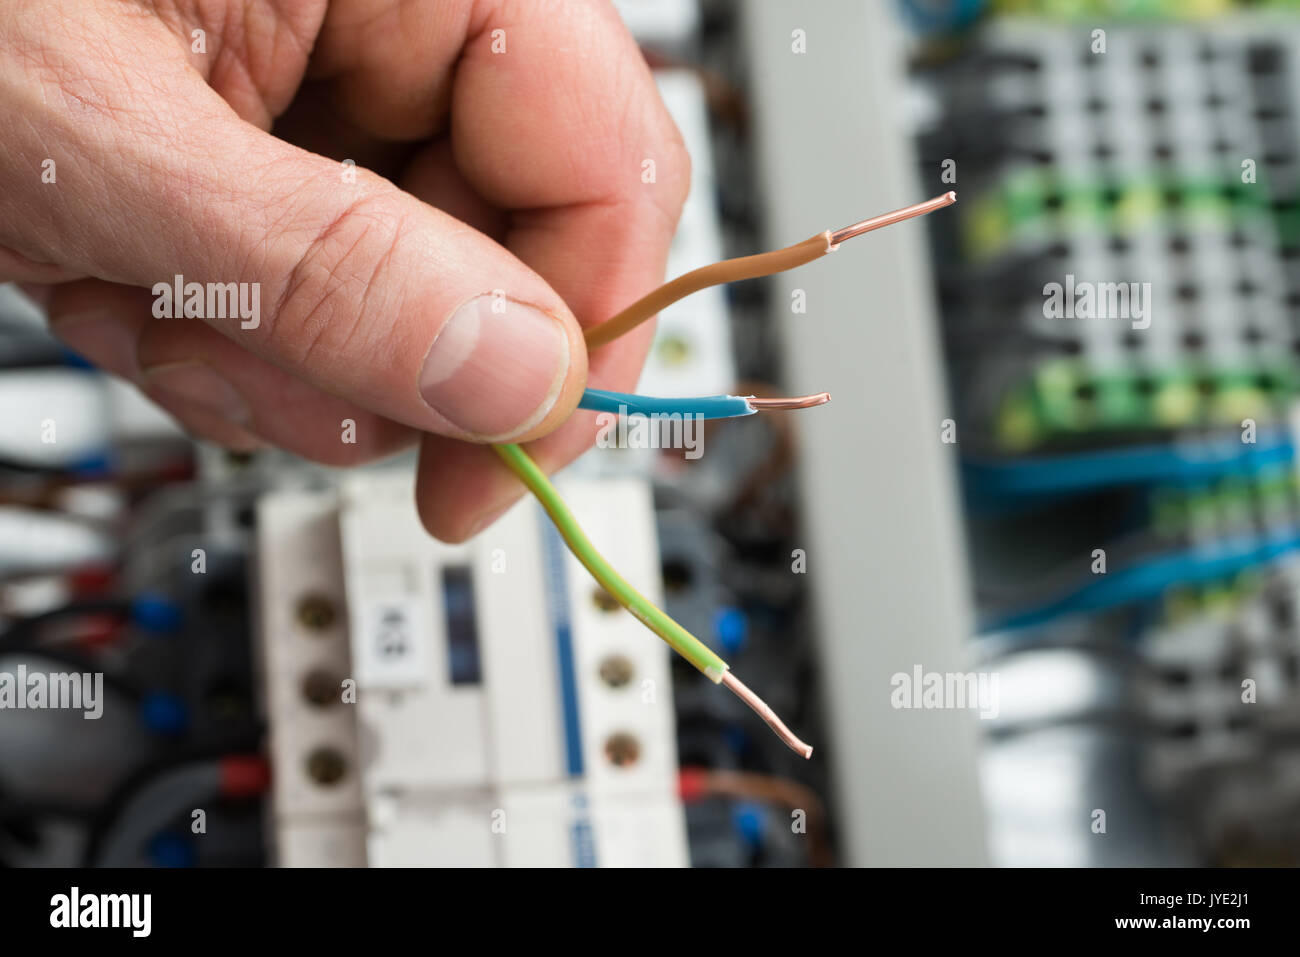 Close-up Of A Person's Hand Holding Cables Stock Photo